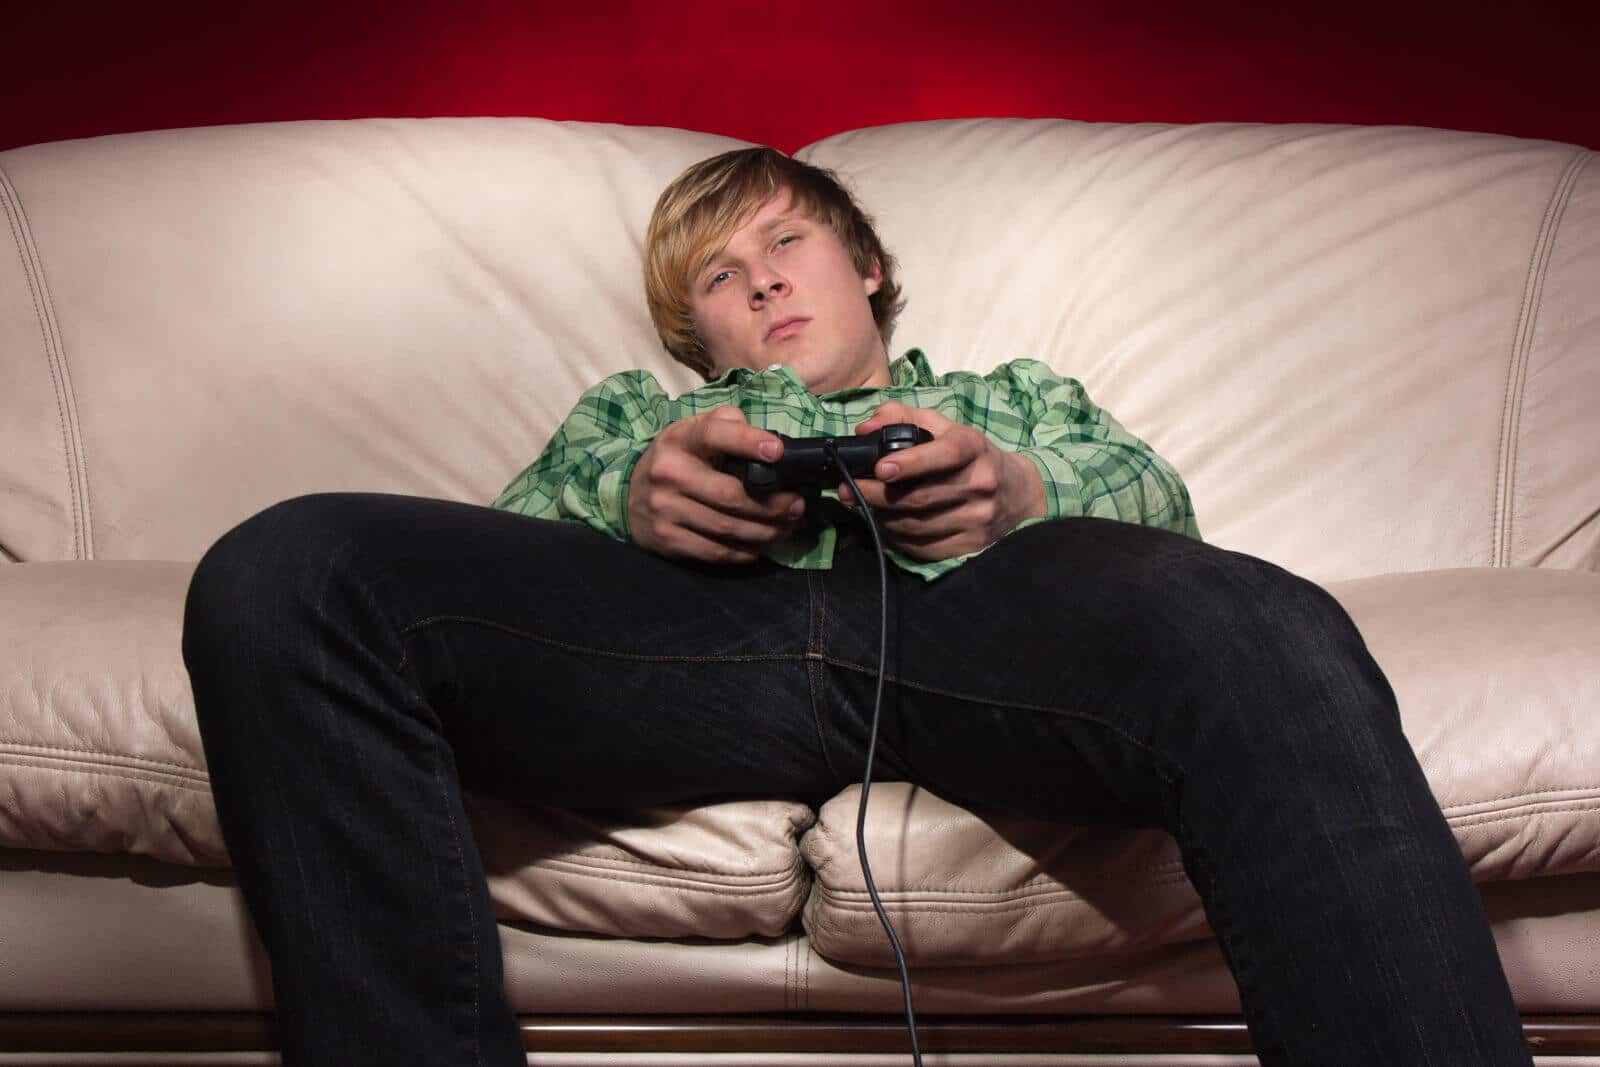 Male teen playing video games for more than 5 hours; in clear need of treatment.